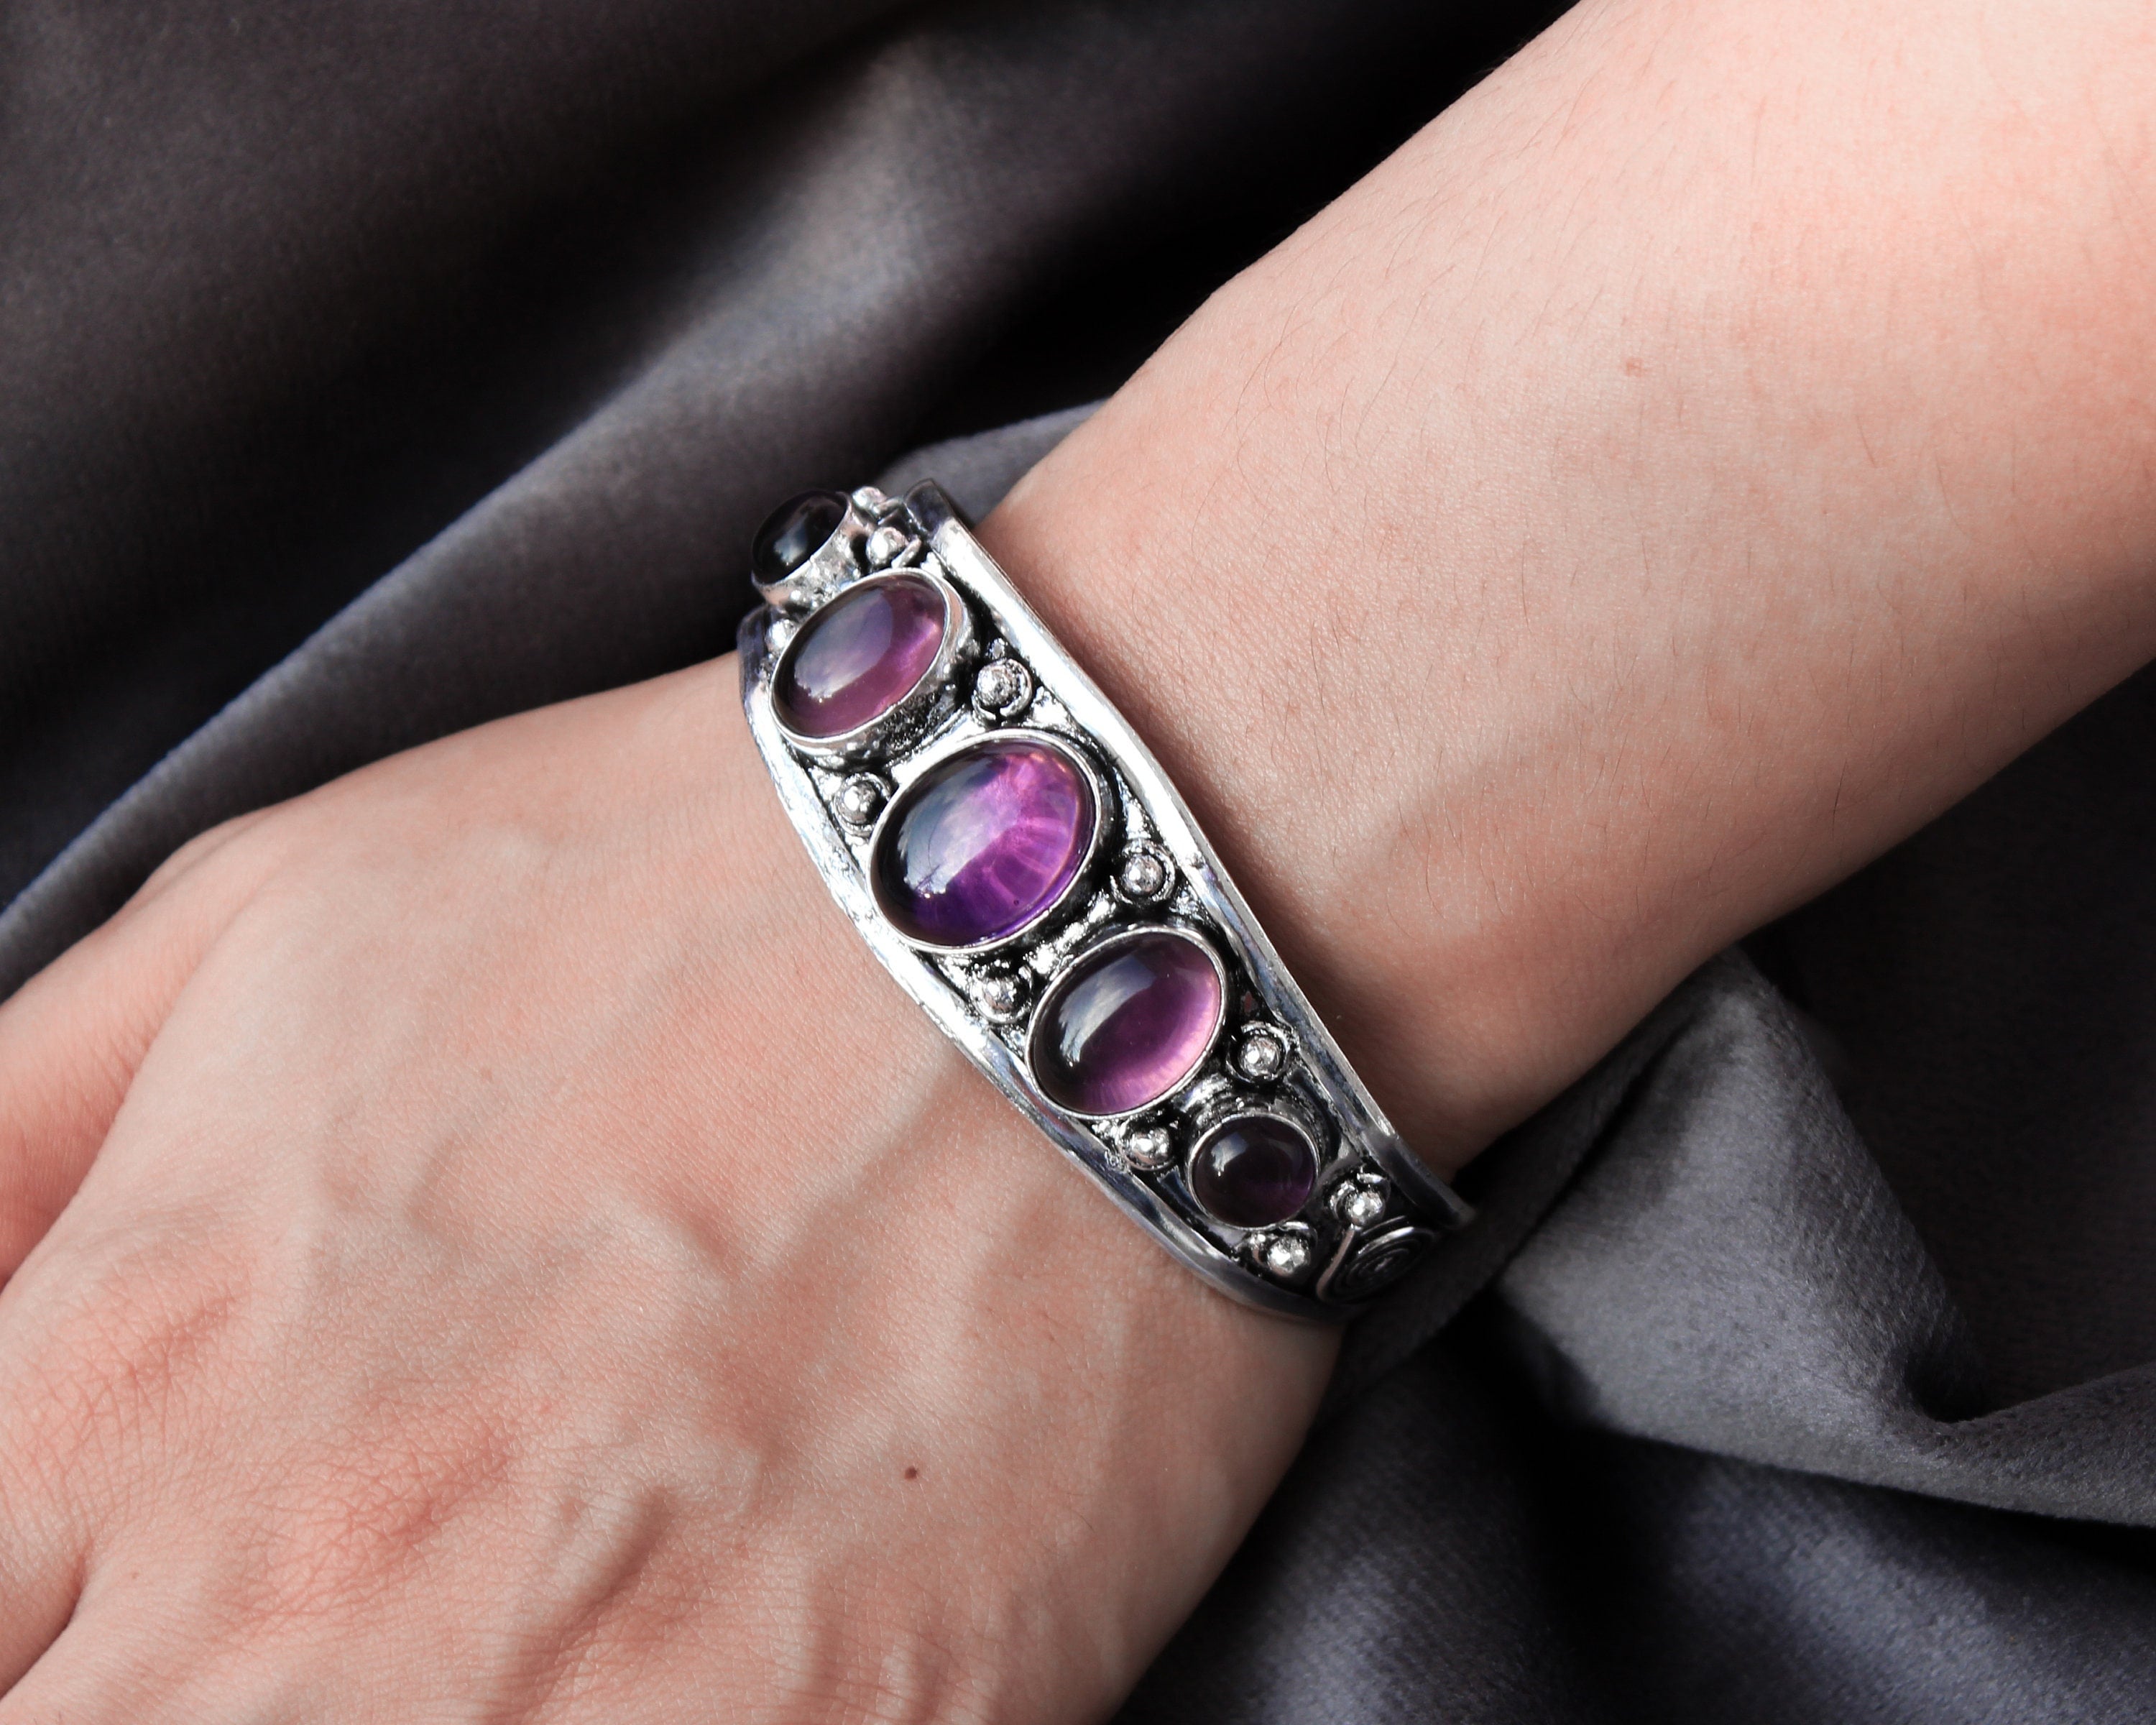 Buy Wide Cuff Bracelet Online In India  Etsy India